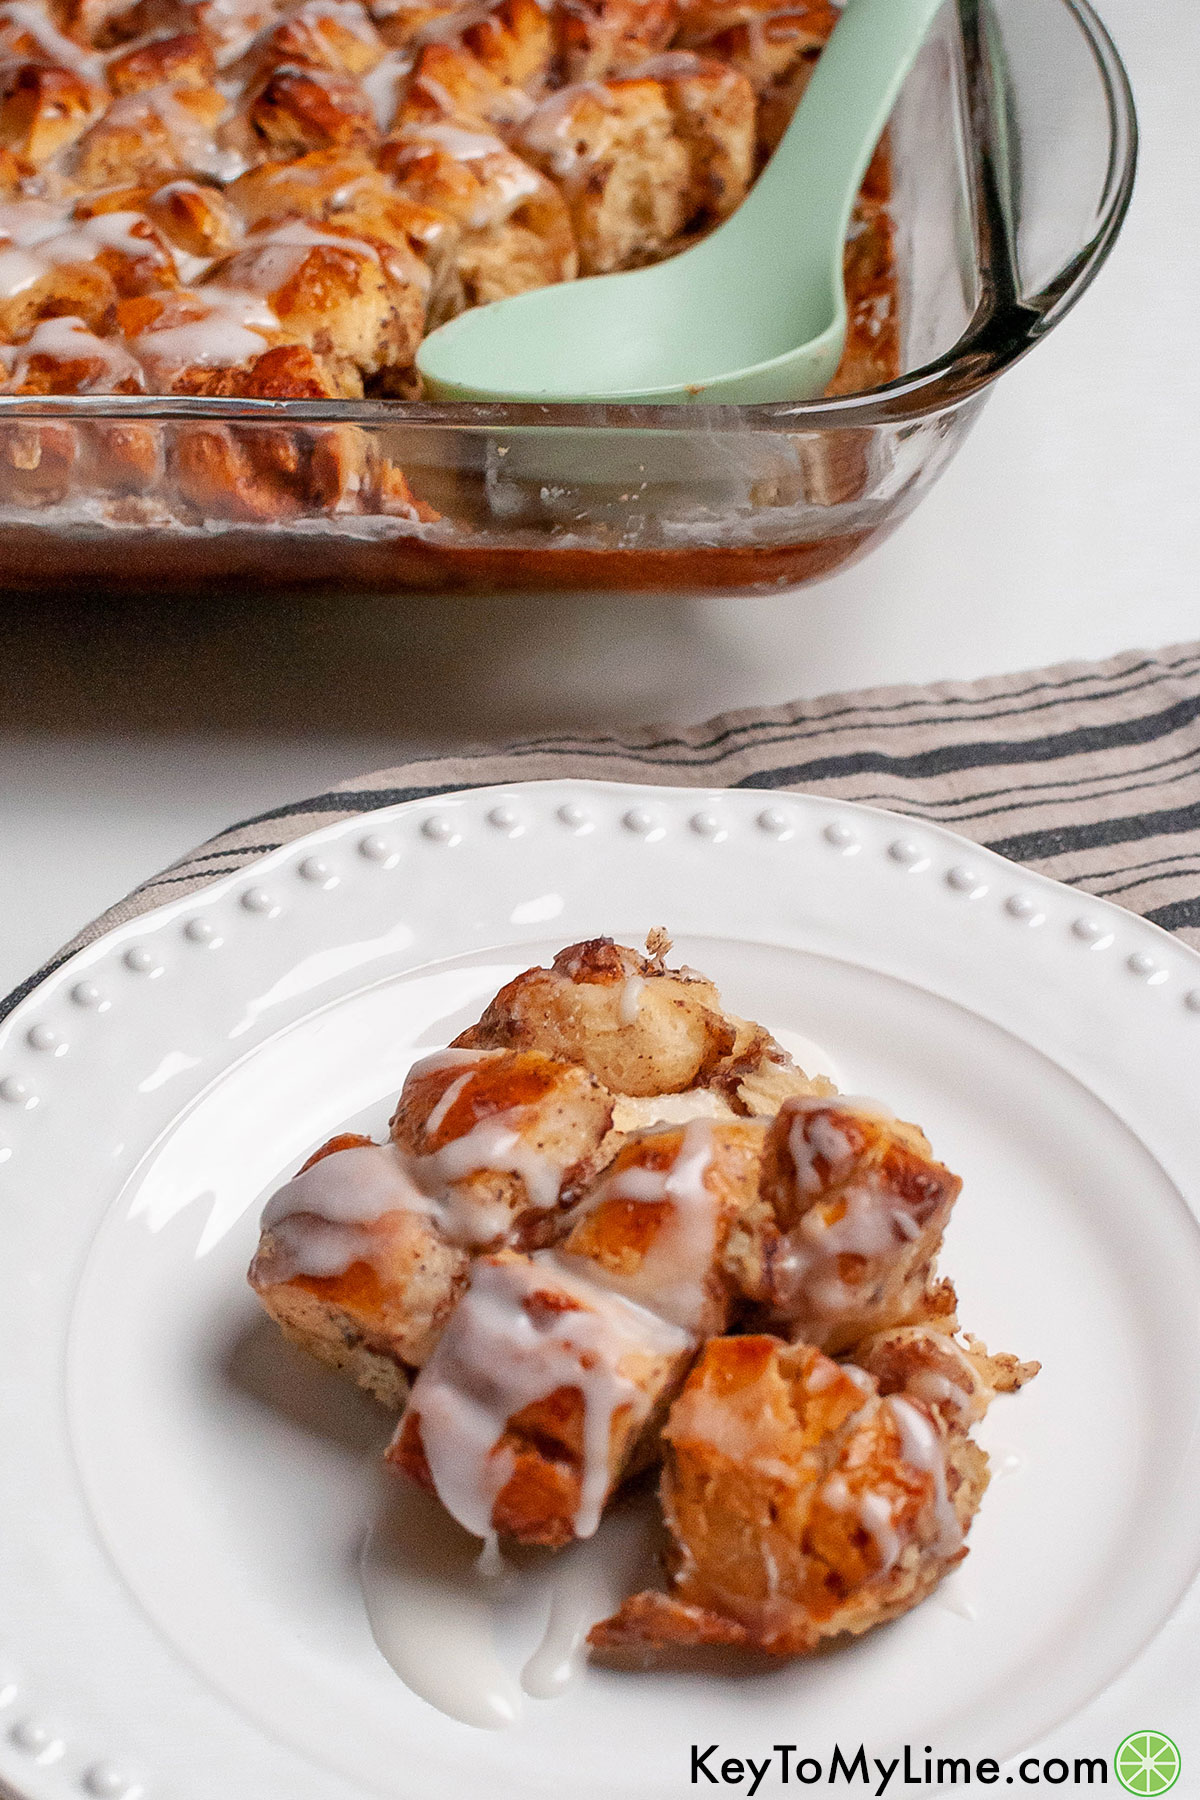 A serving of cinnamon roll casserole next to a large casserole dish.